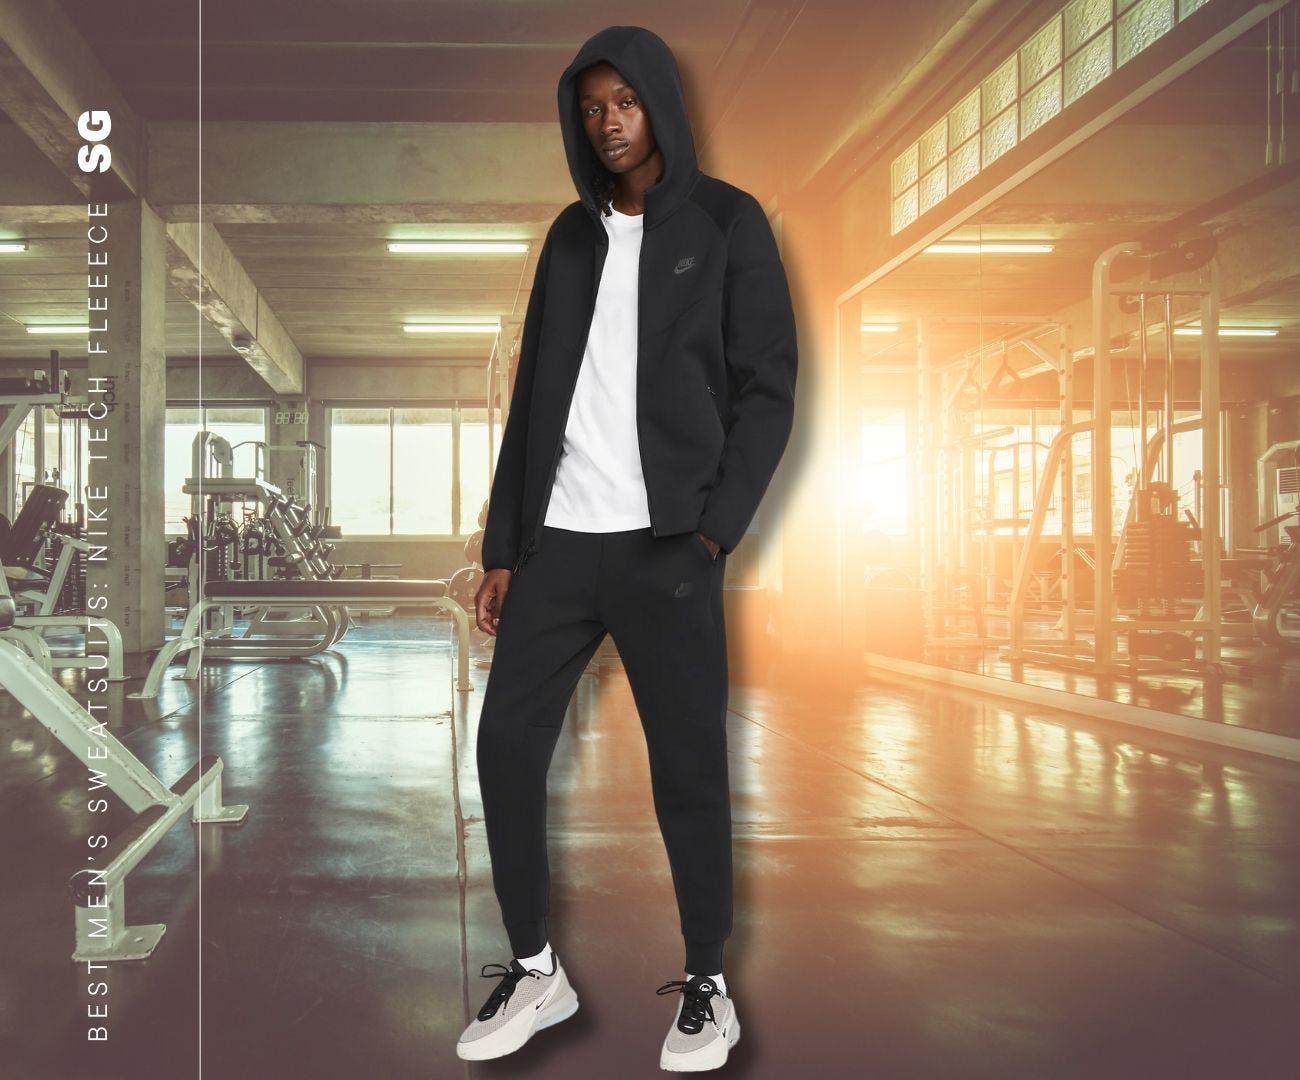 The BEST NIKE Joggers To Buy In 2022